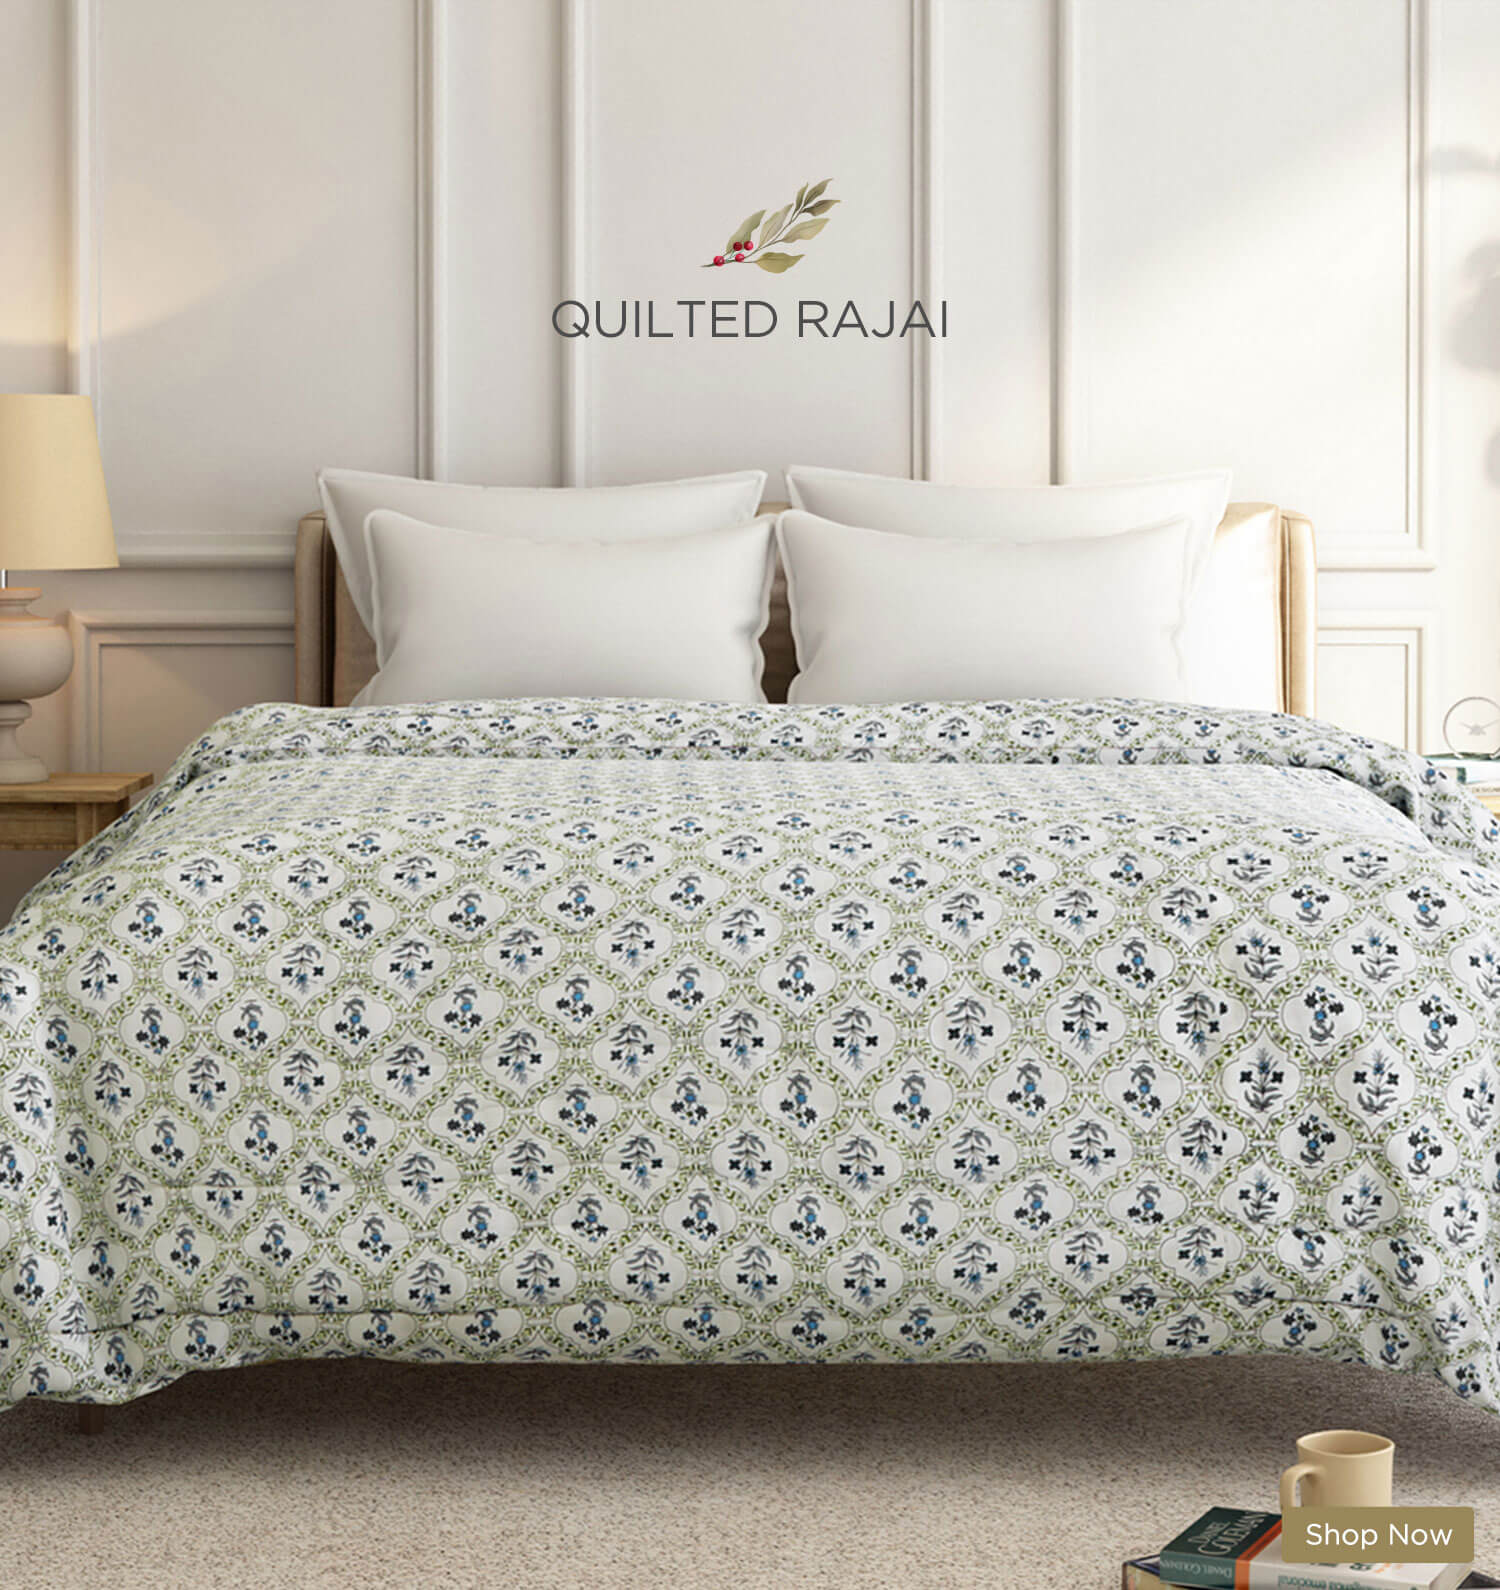 Buy Bedding Products Online